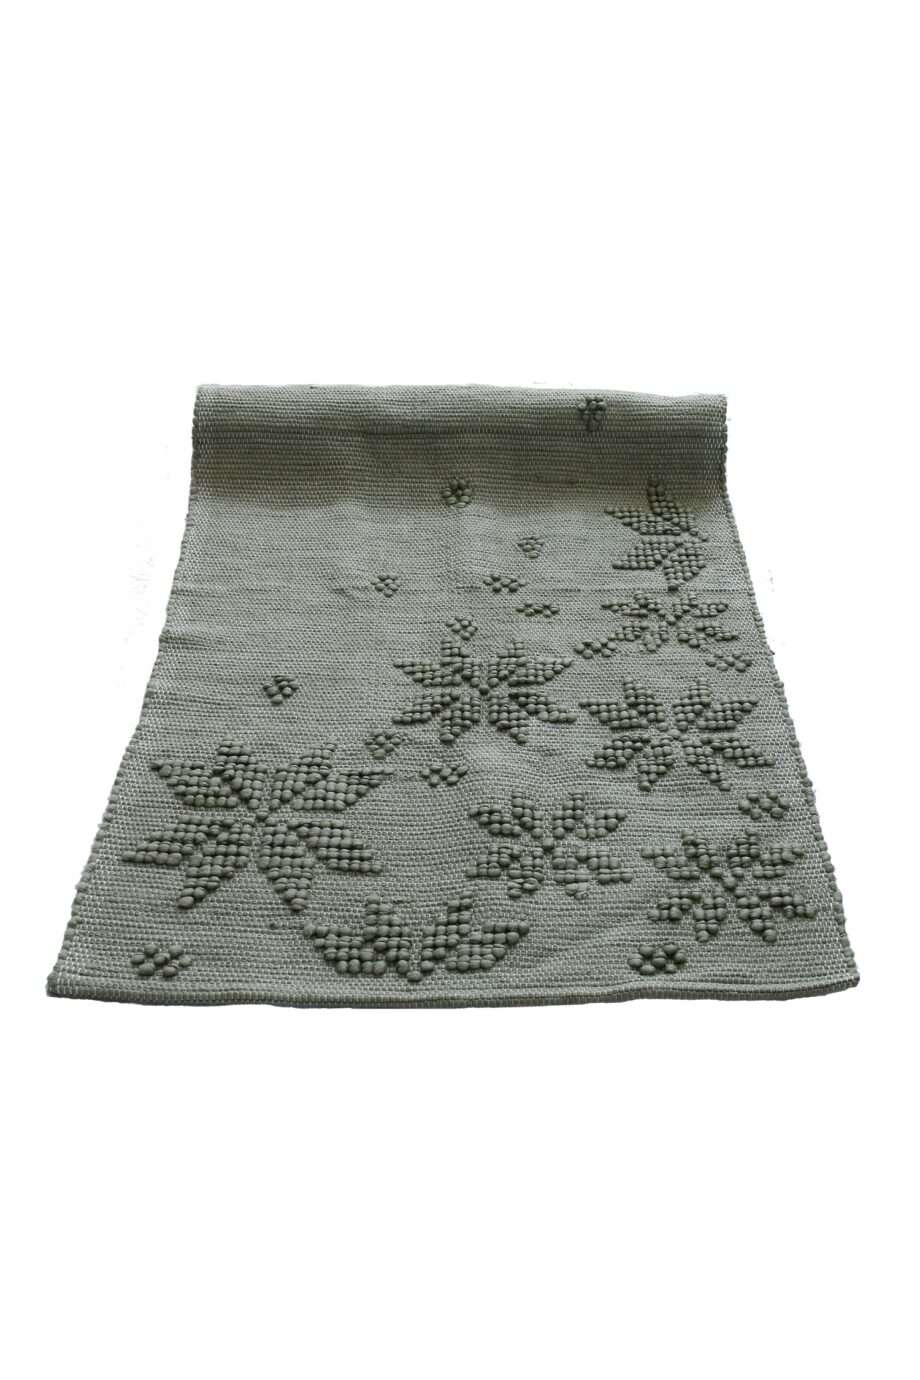 woven cotton floor mat snowflakes olive green small